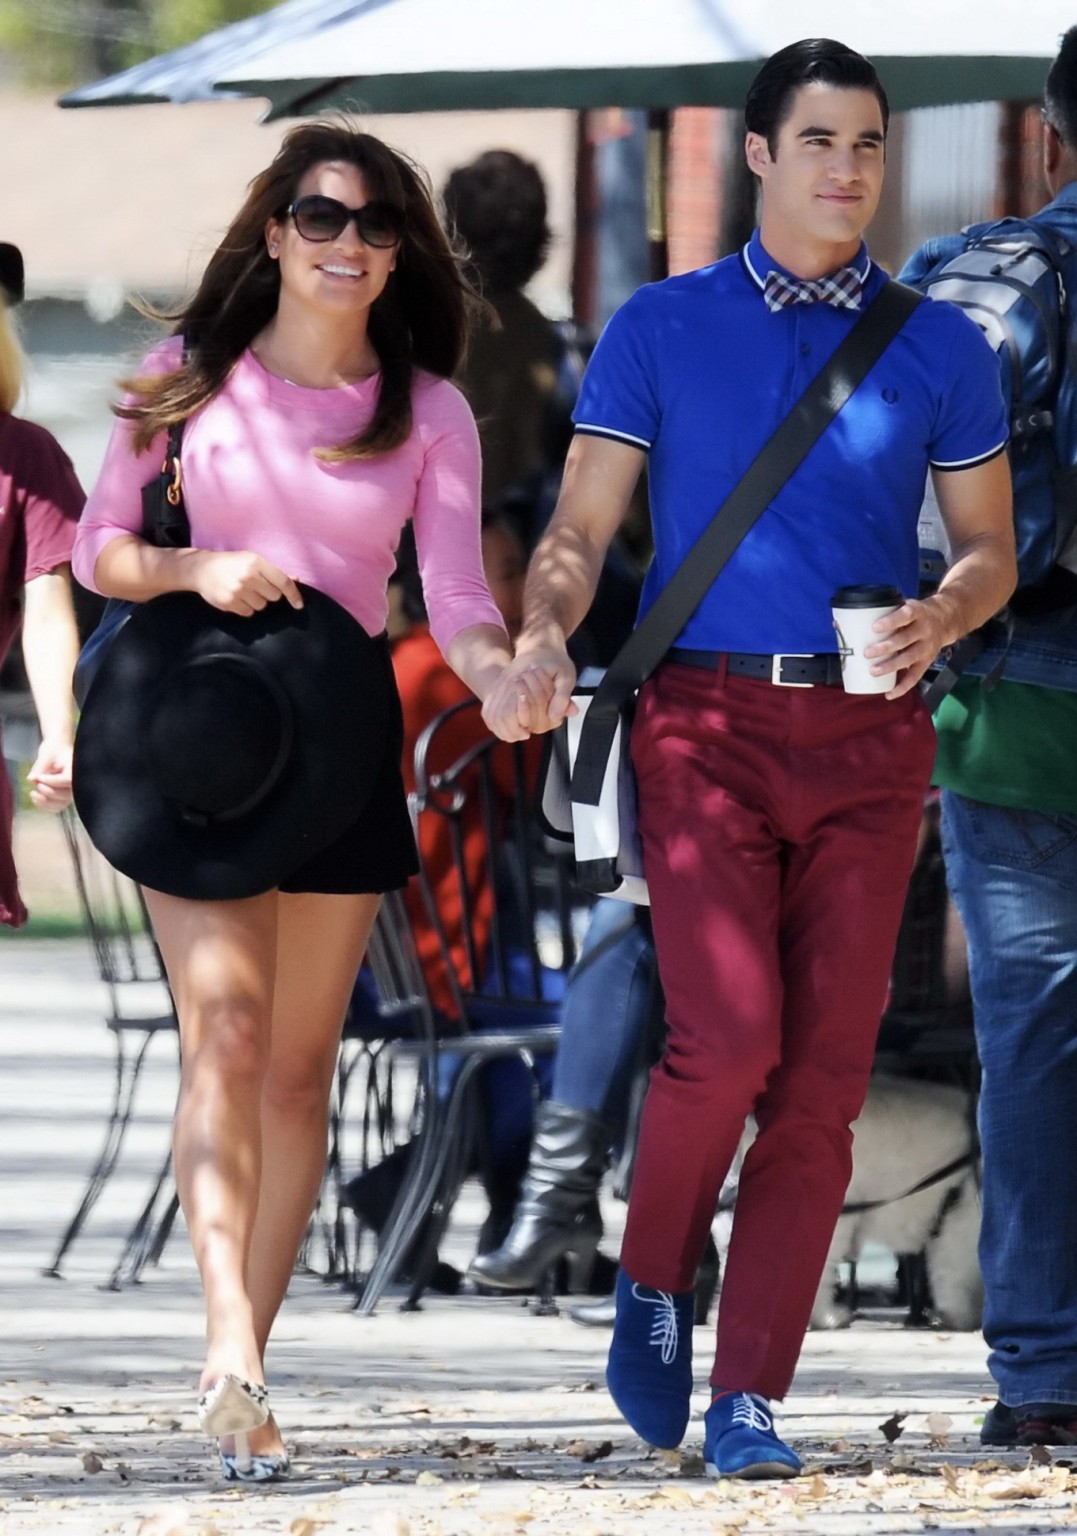 Lea Michele busty and leggy in a tight pink top and shorts on the set of Glee in #75185213